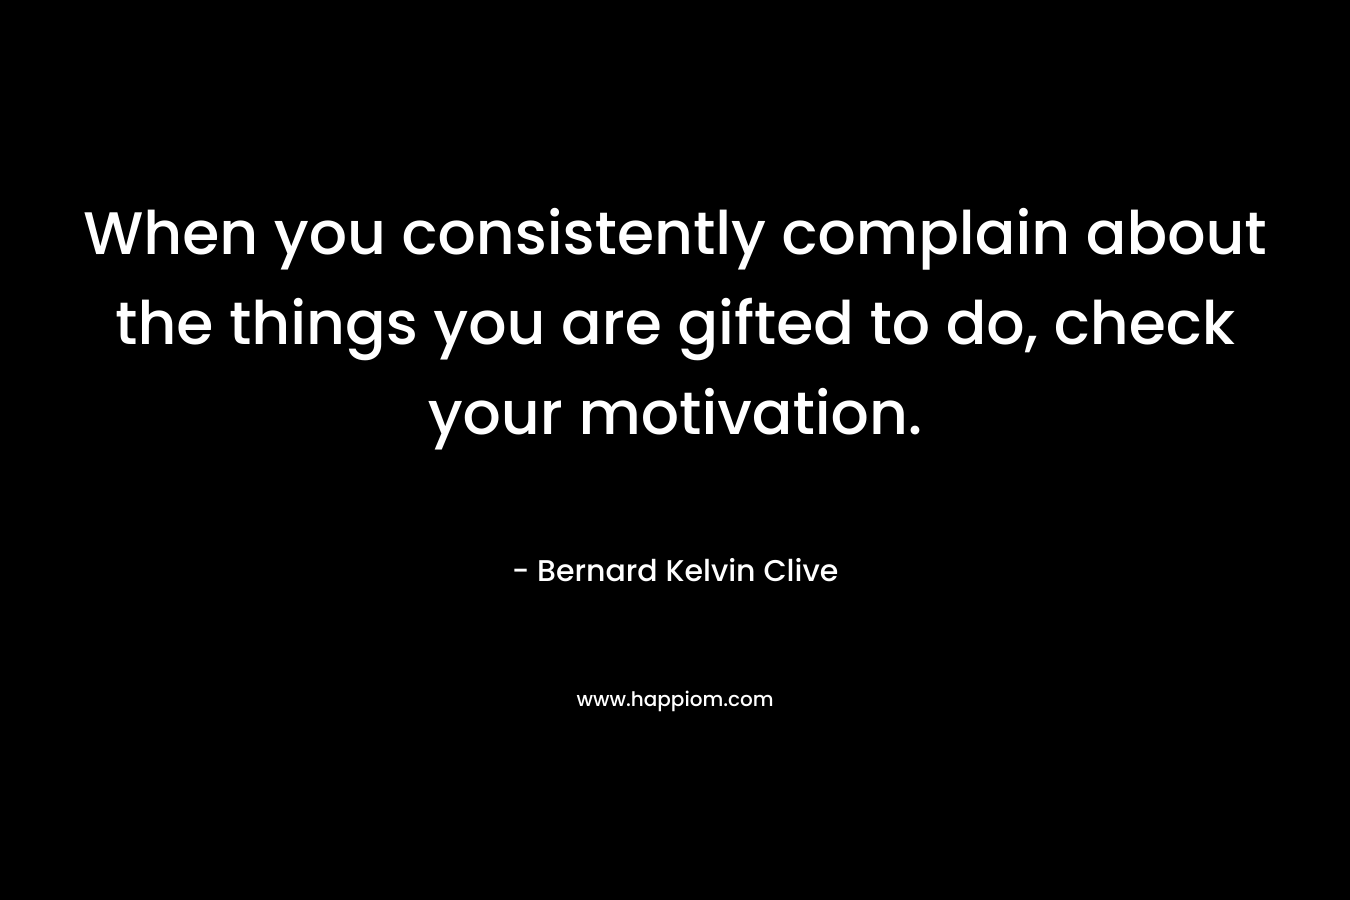 When you consistently complain about the things you are gifted to do, check your motivation.